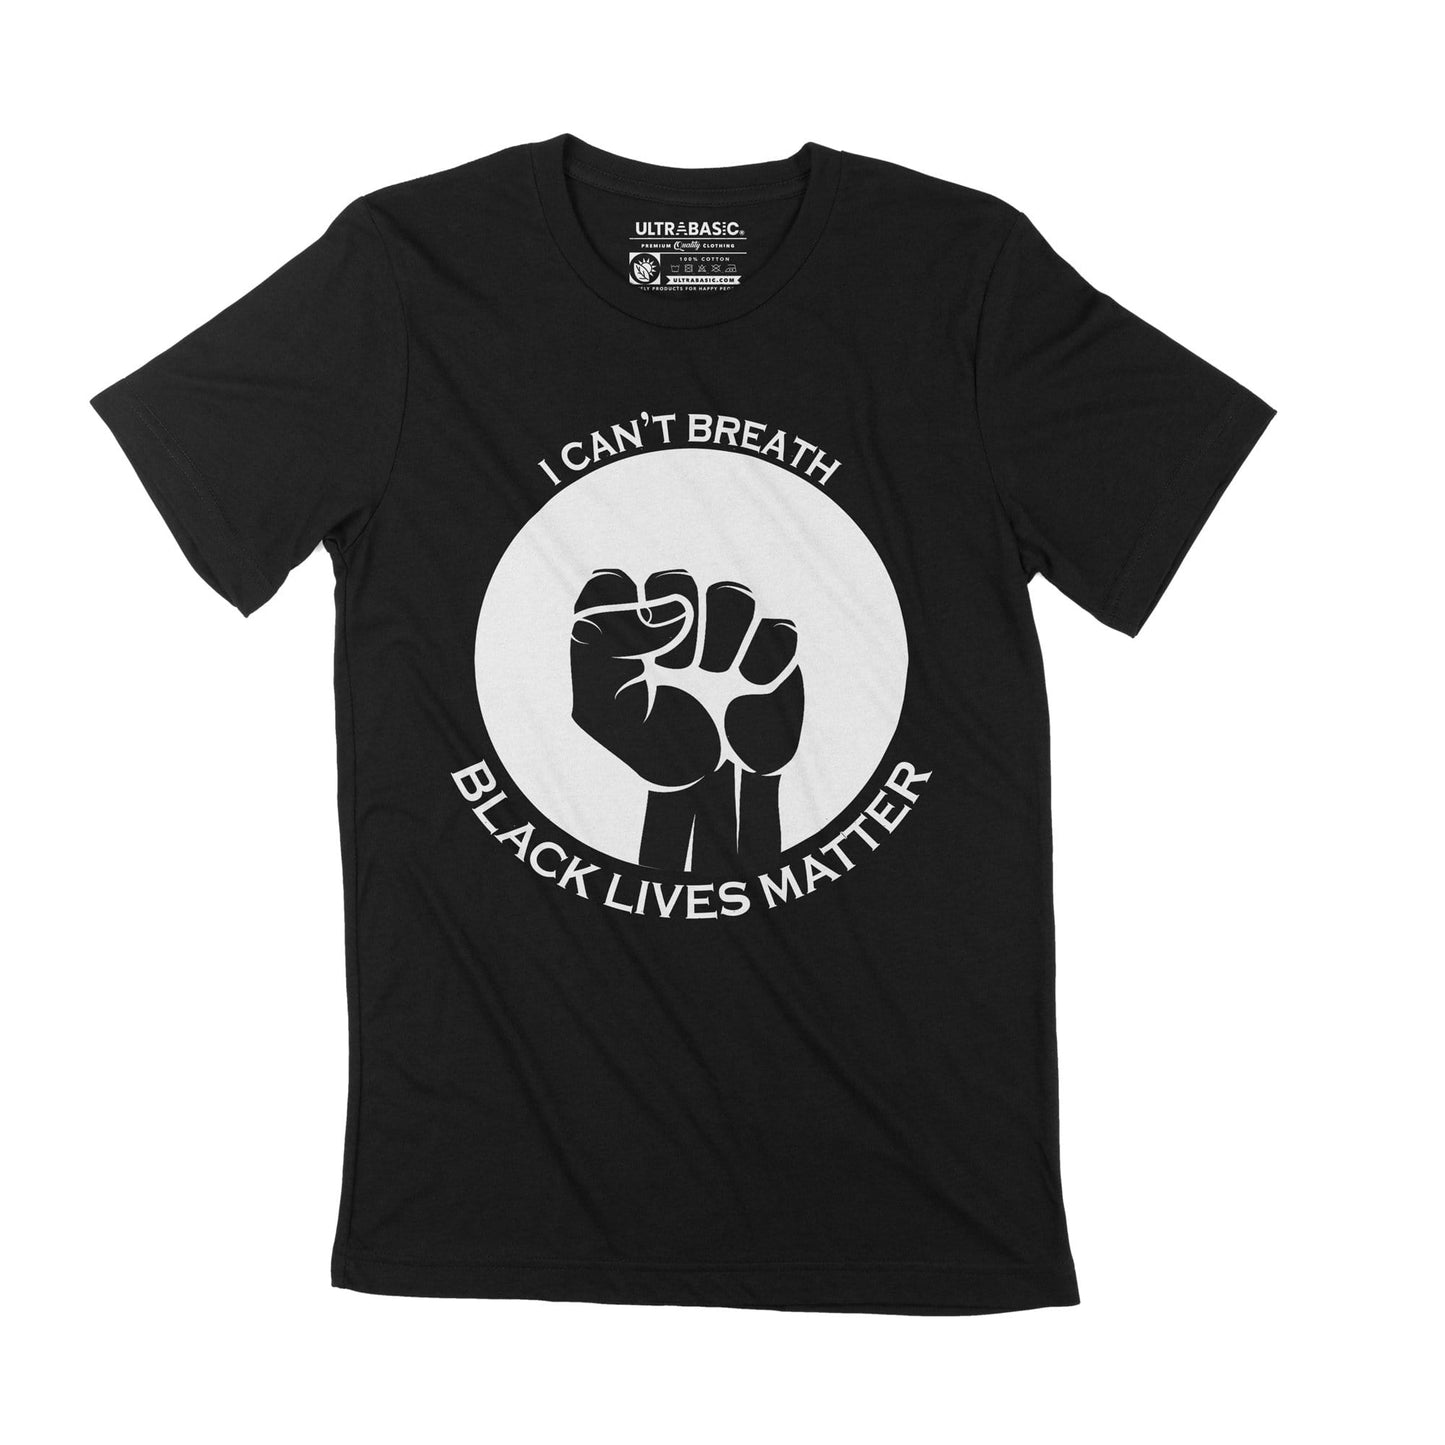 george floyd movement tshirt revolution love no hate tees political police brutality shirt support kindness over everything freedom empowerment no racism anti racist silence violence respect us solidarity first equal rights dont shoot equality